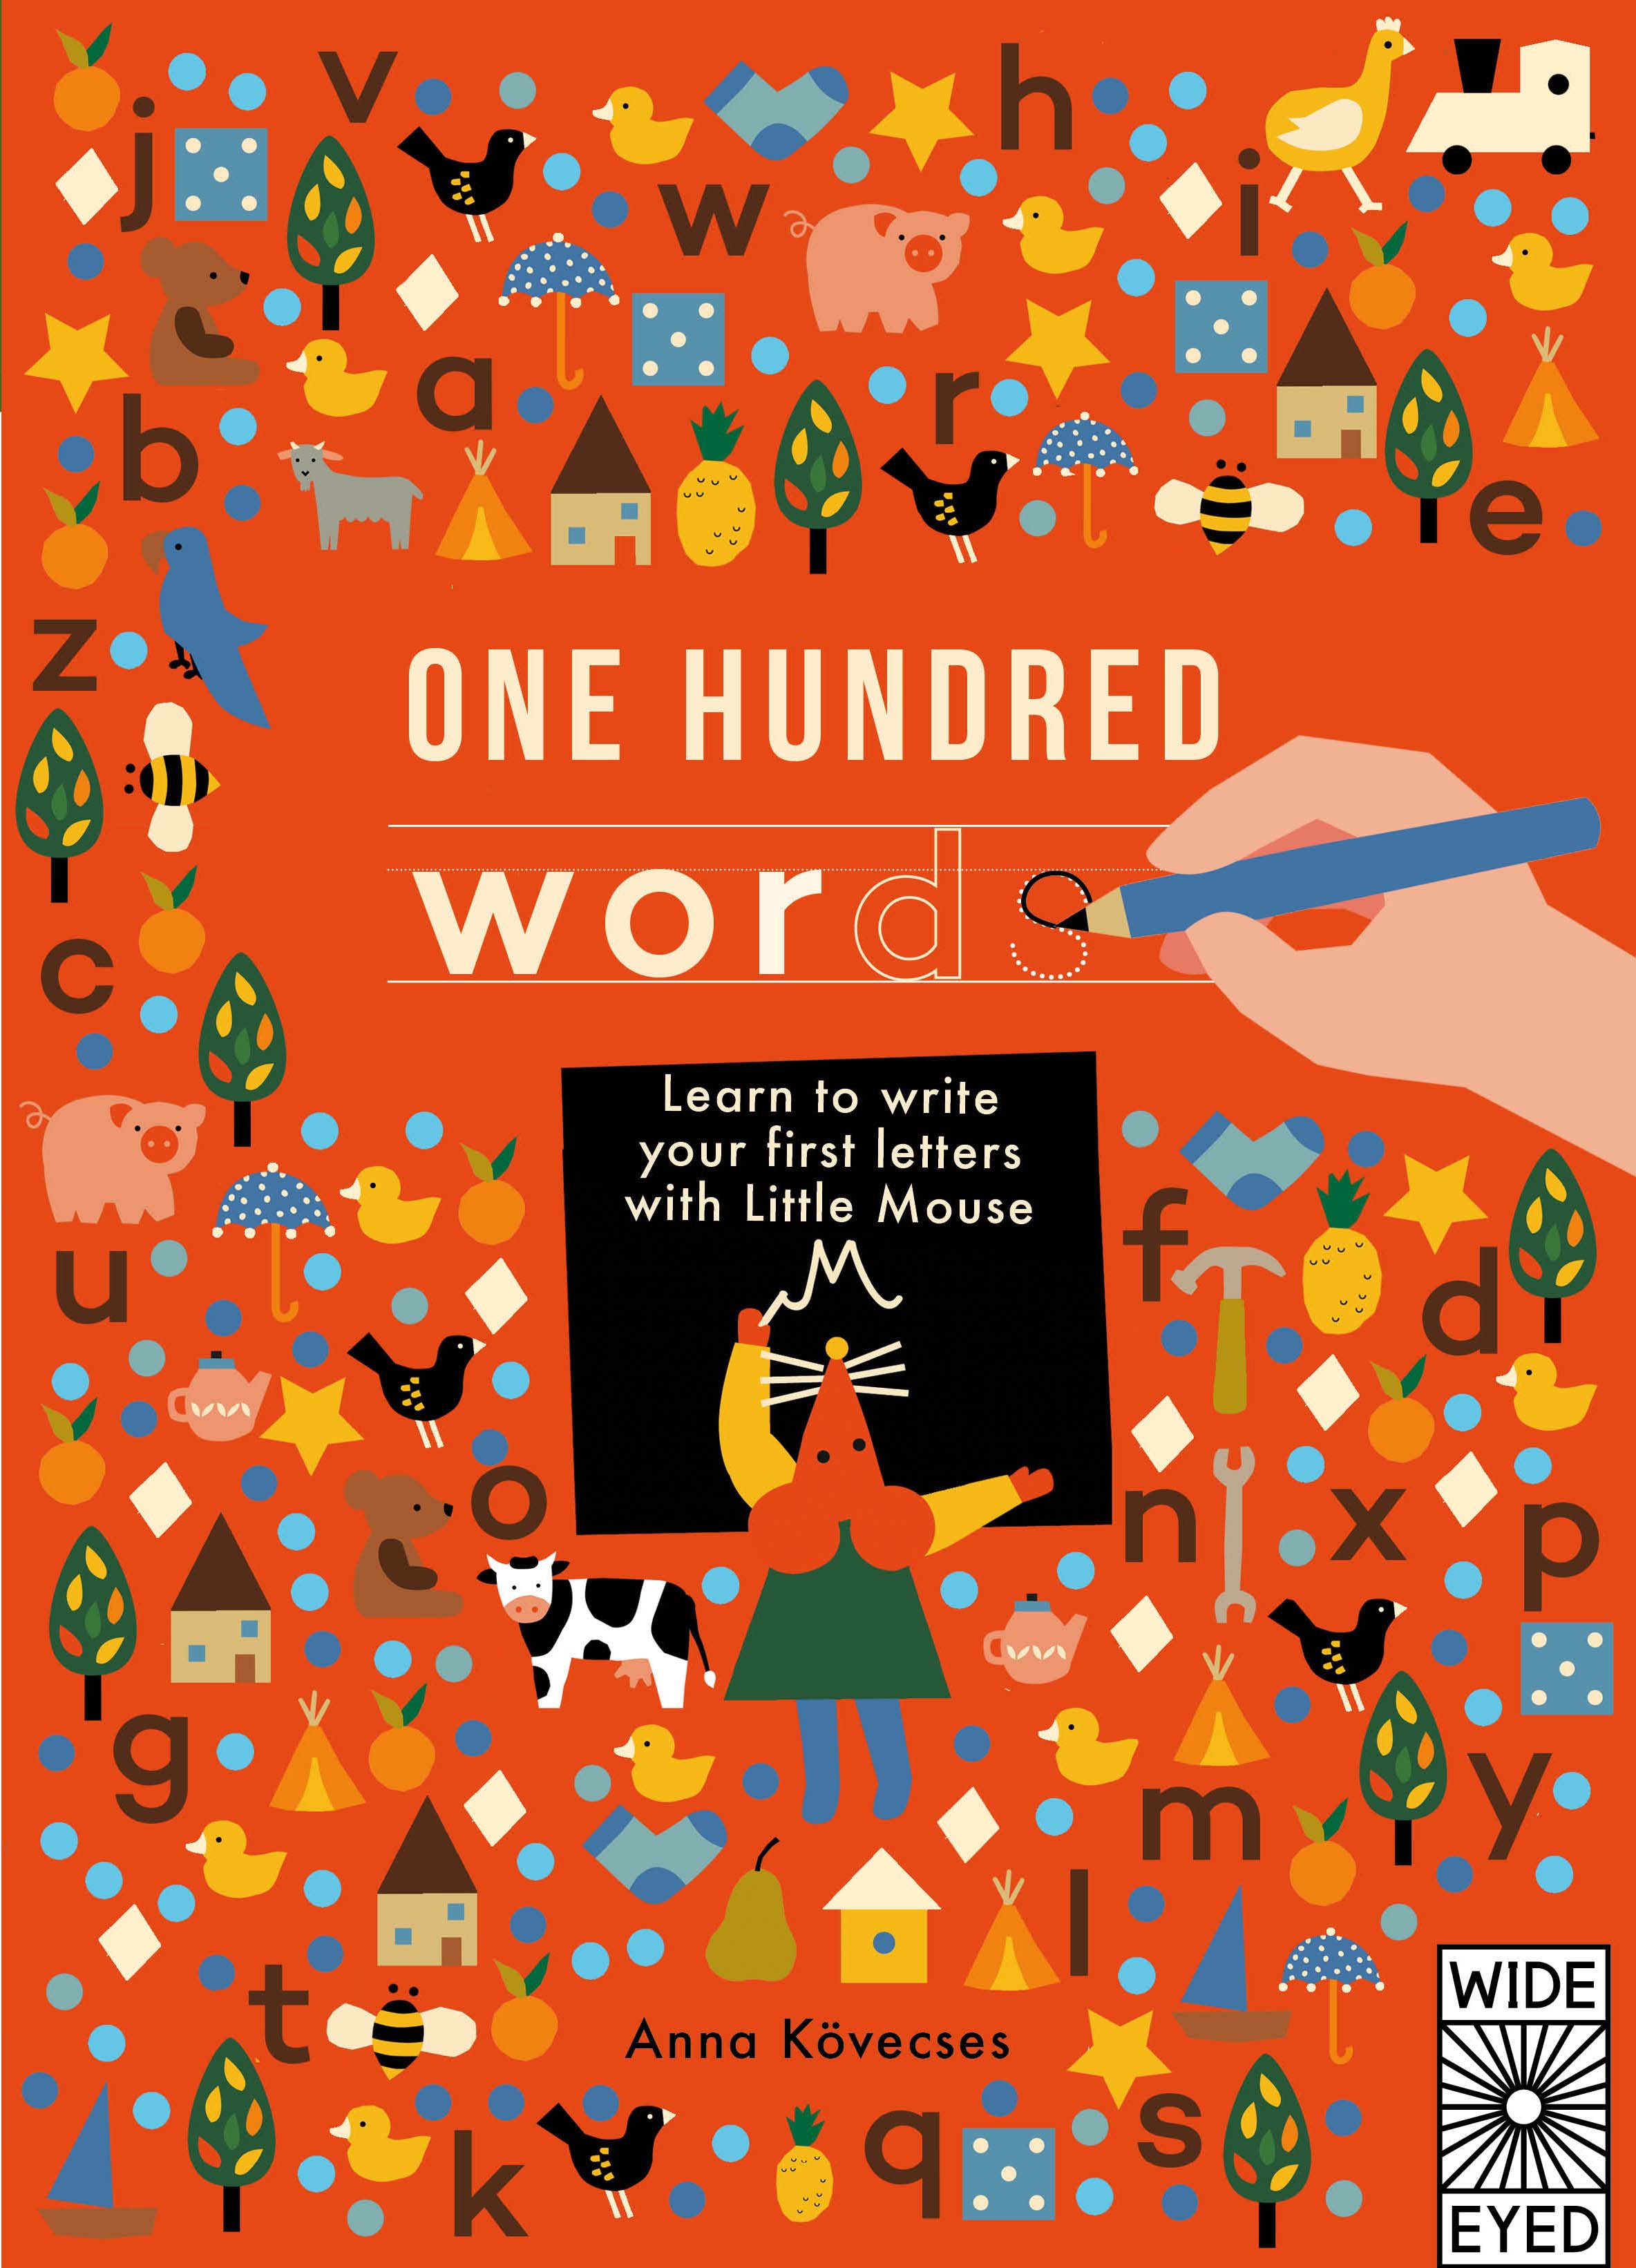 One Hundred Words - A first handwriting book